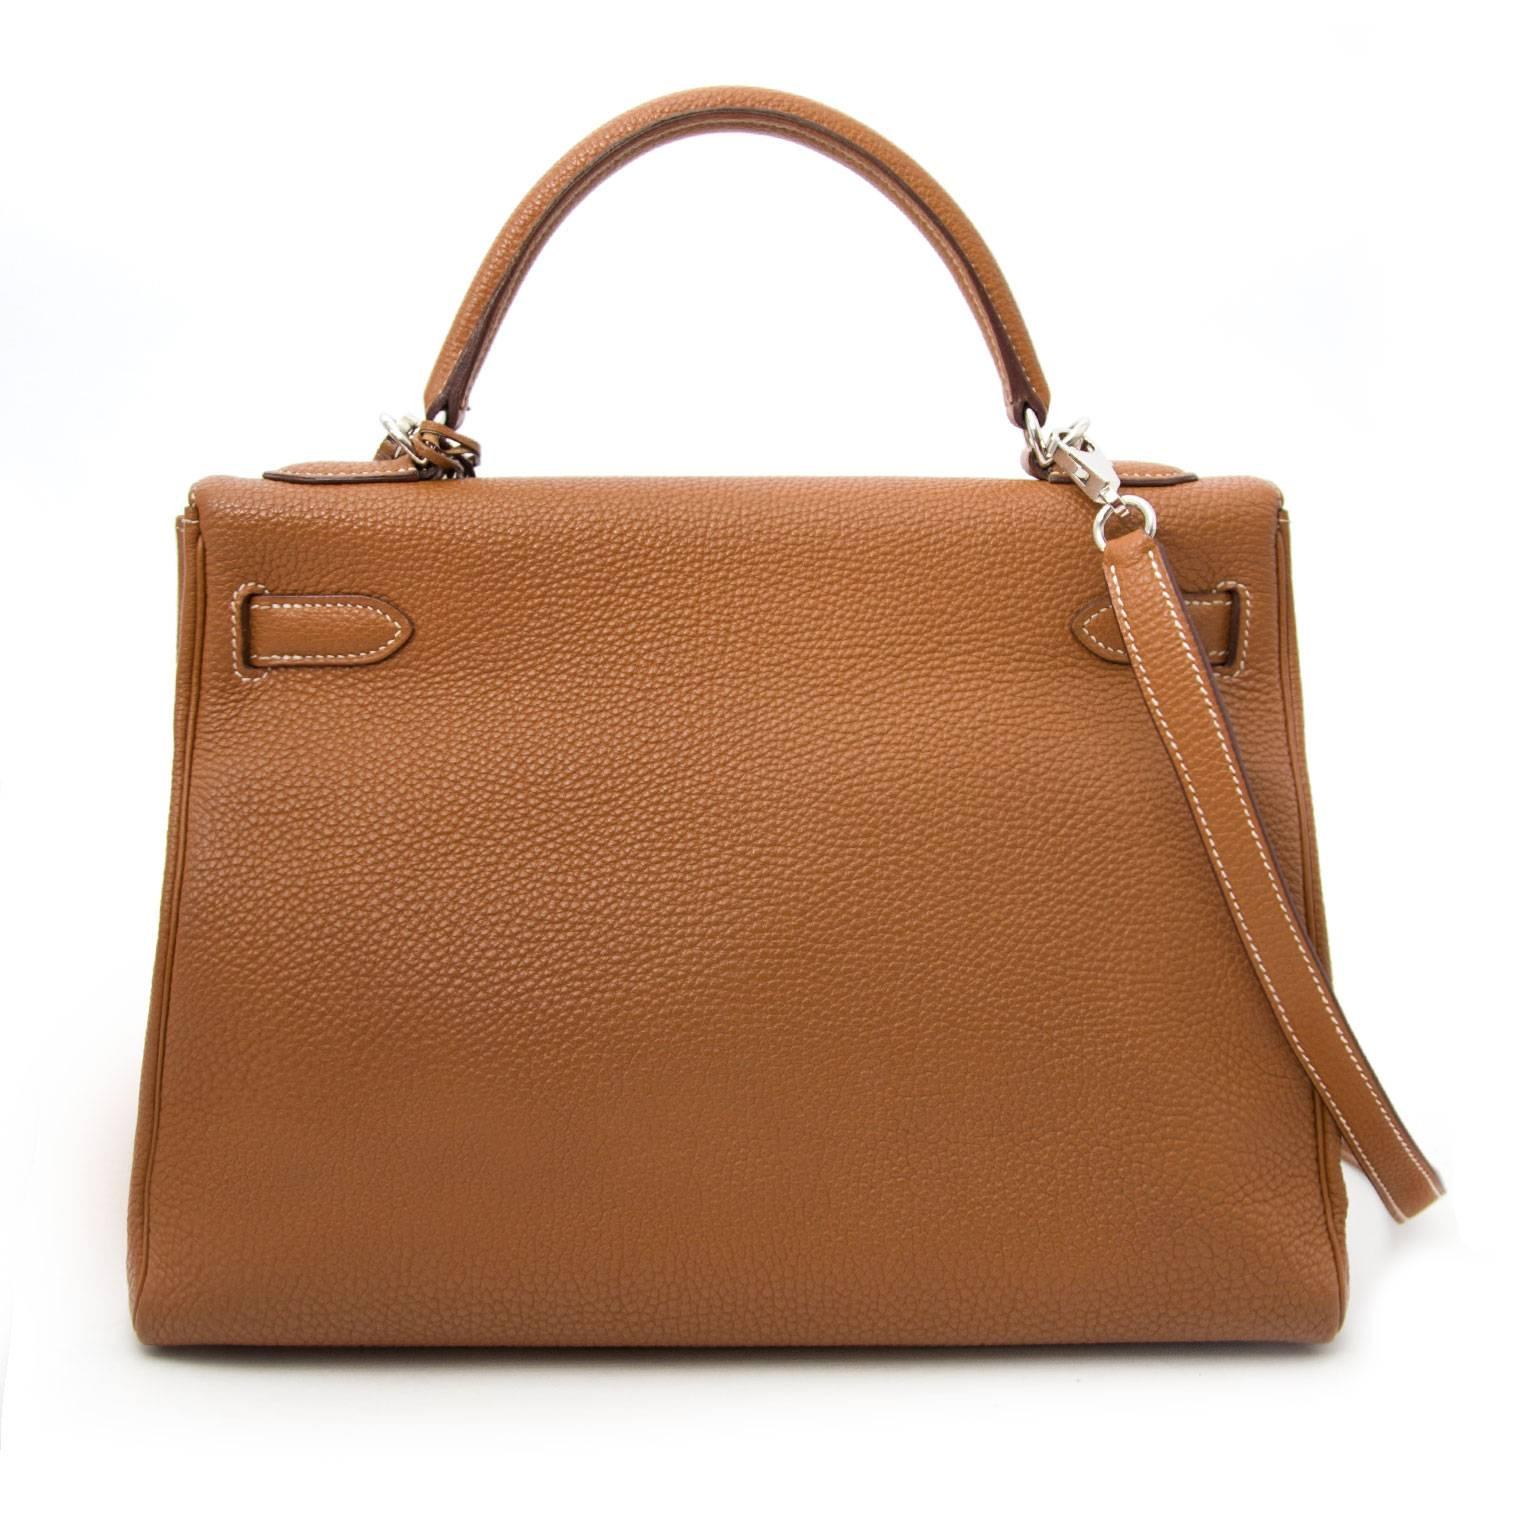 

Hermès Kelly 32 Togo Gold PHW

This Hermès Kelly comes in a smooth and grainy gold togo leather. This is a real statement piece.

The Kelly bag features palladium silver hardware which makes the gold tone pop! 

Comes with

    Dustbag
   